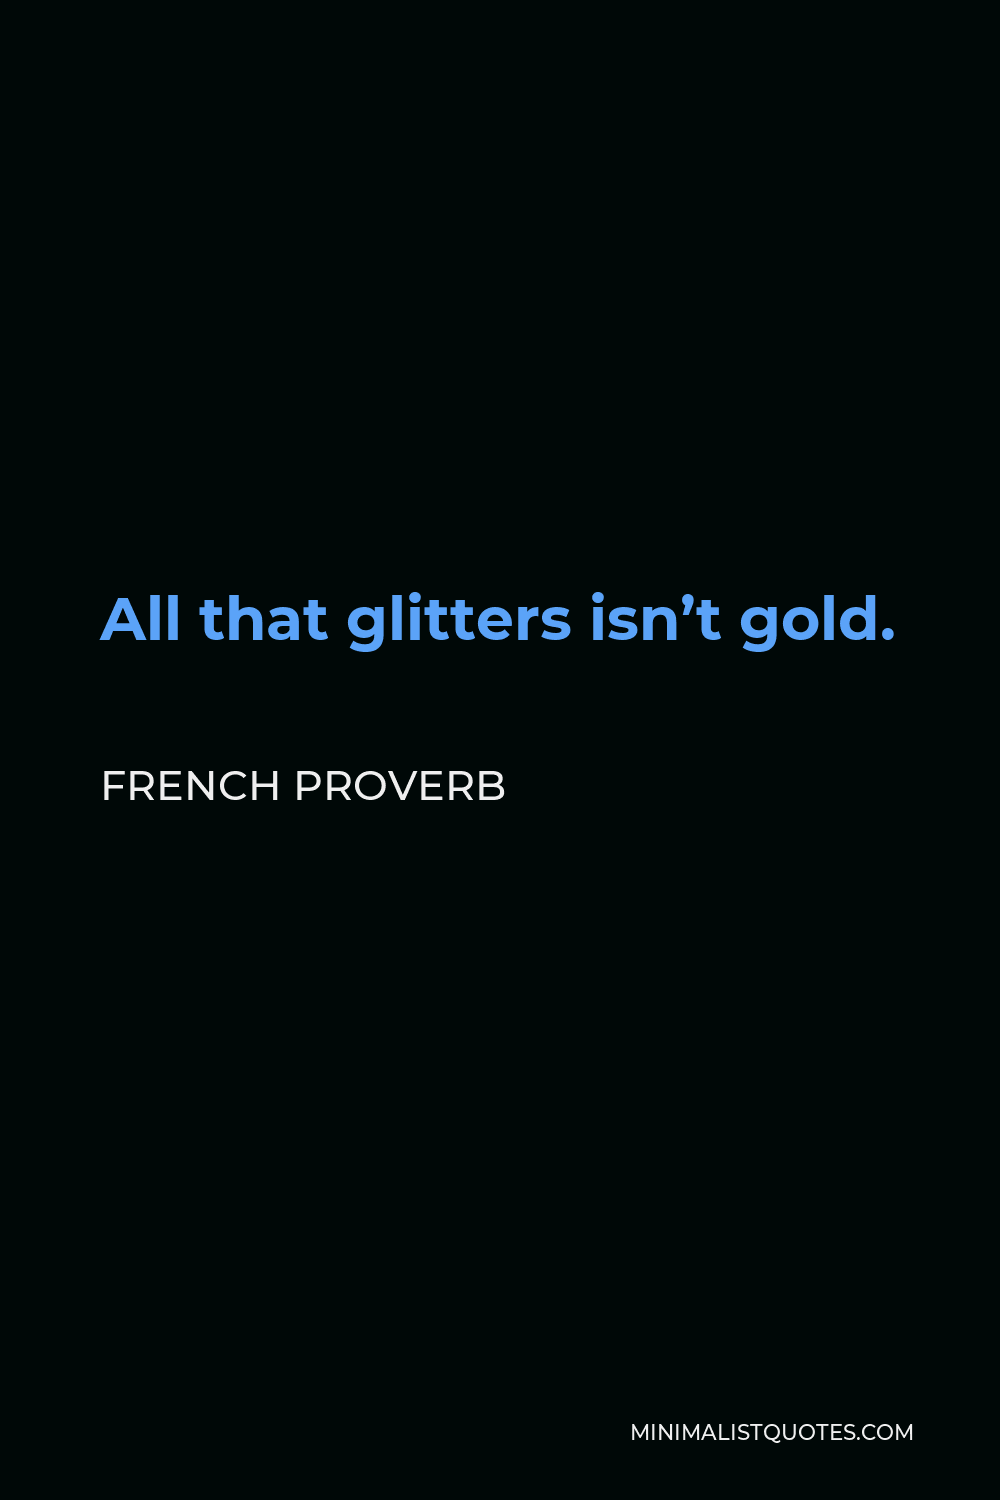 French Proverb Quote - All that glitters isn’t gold.